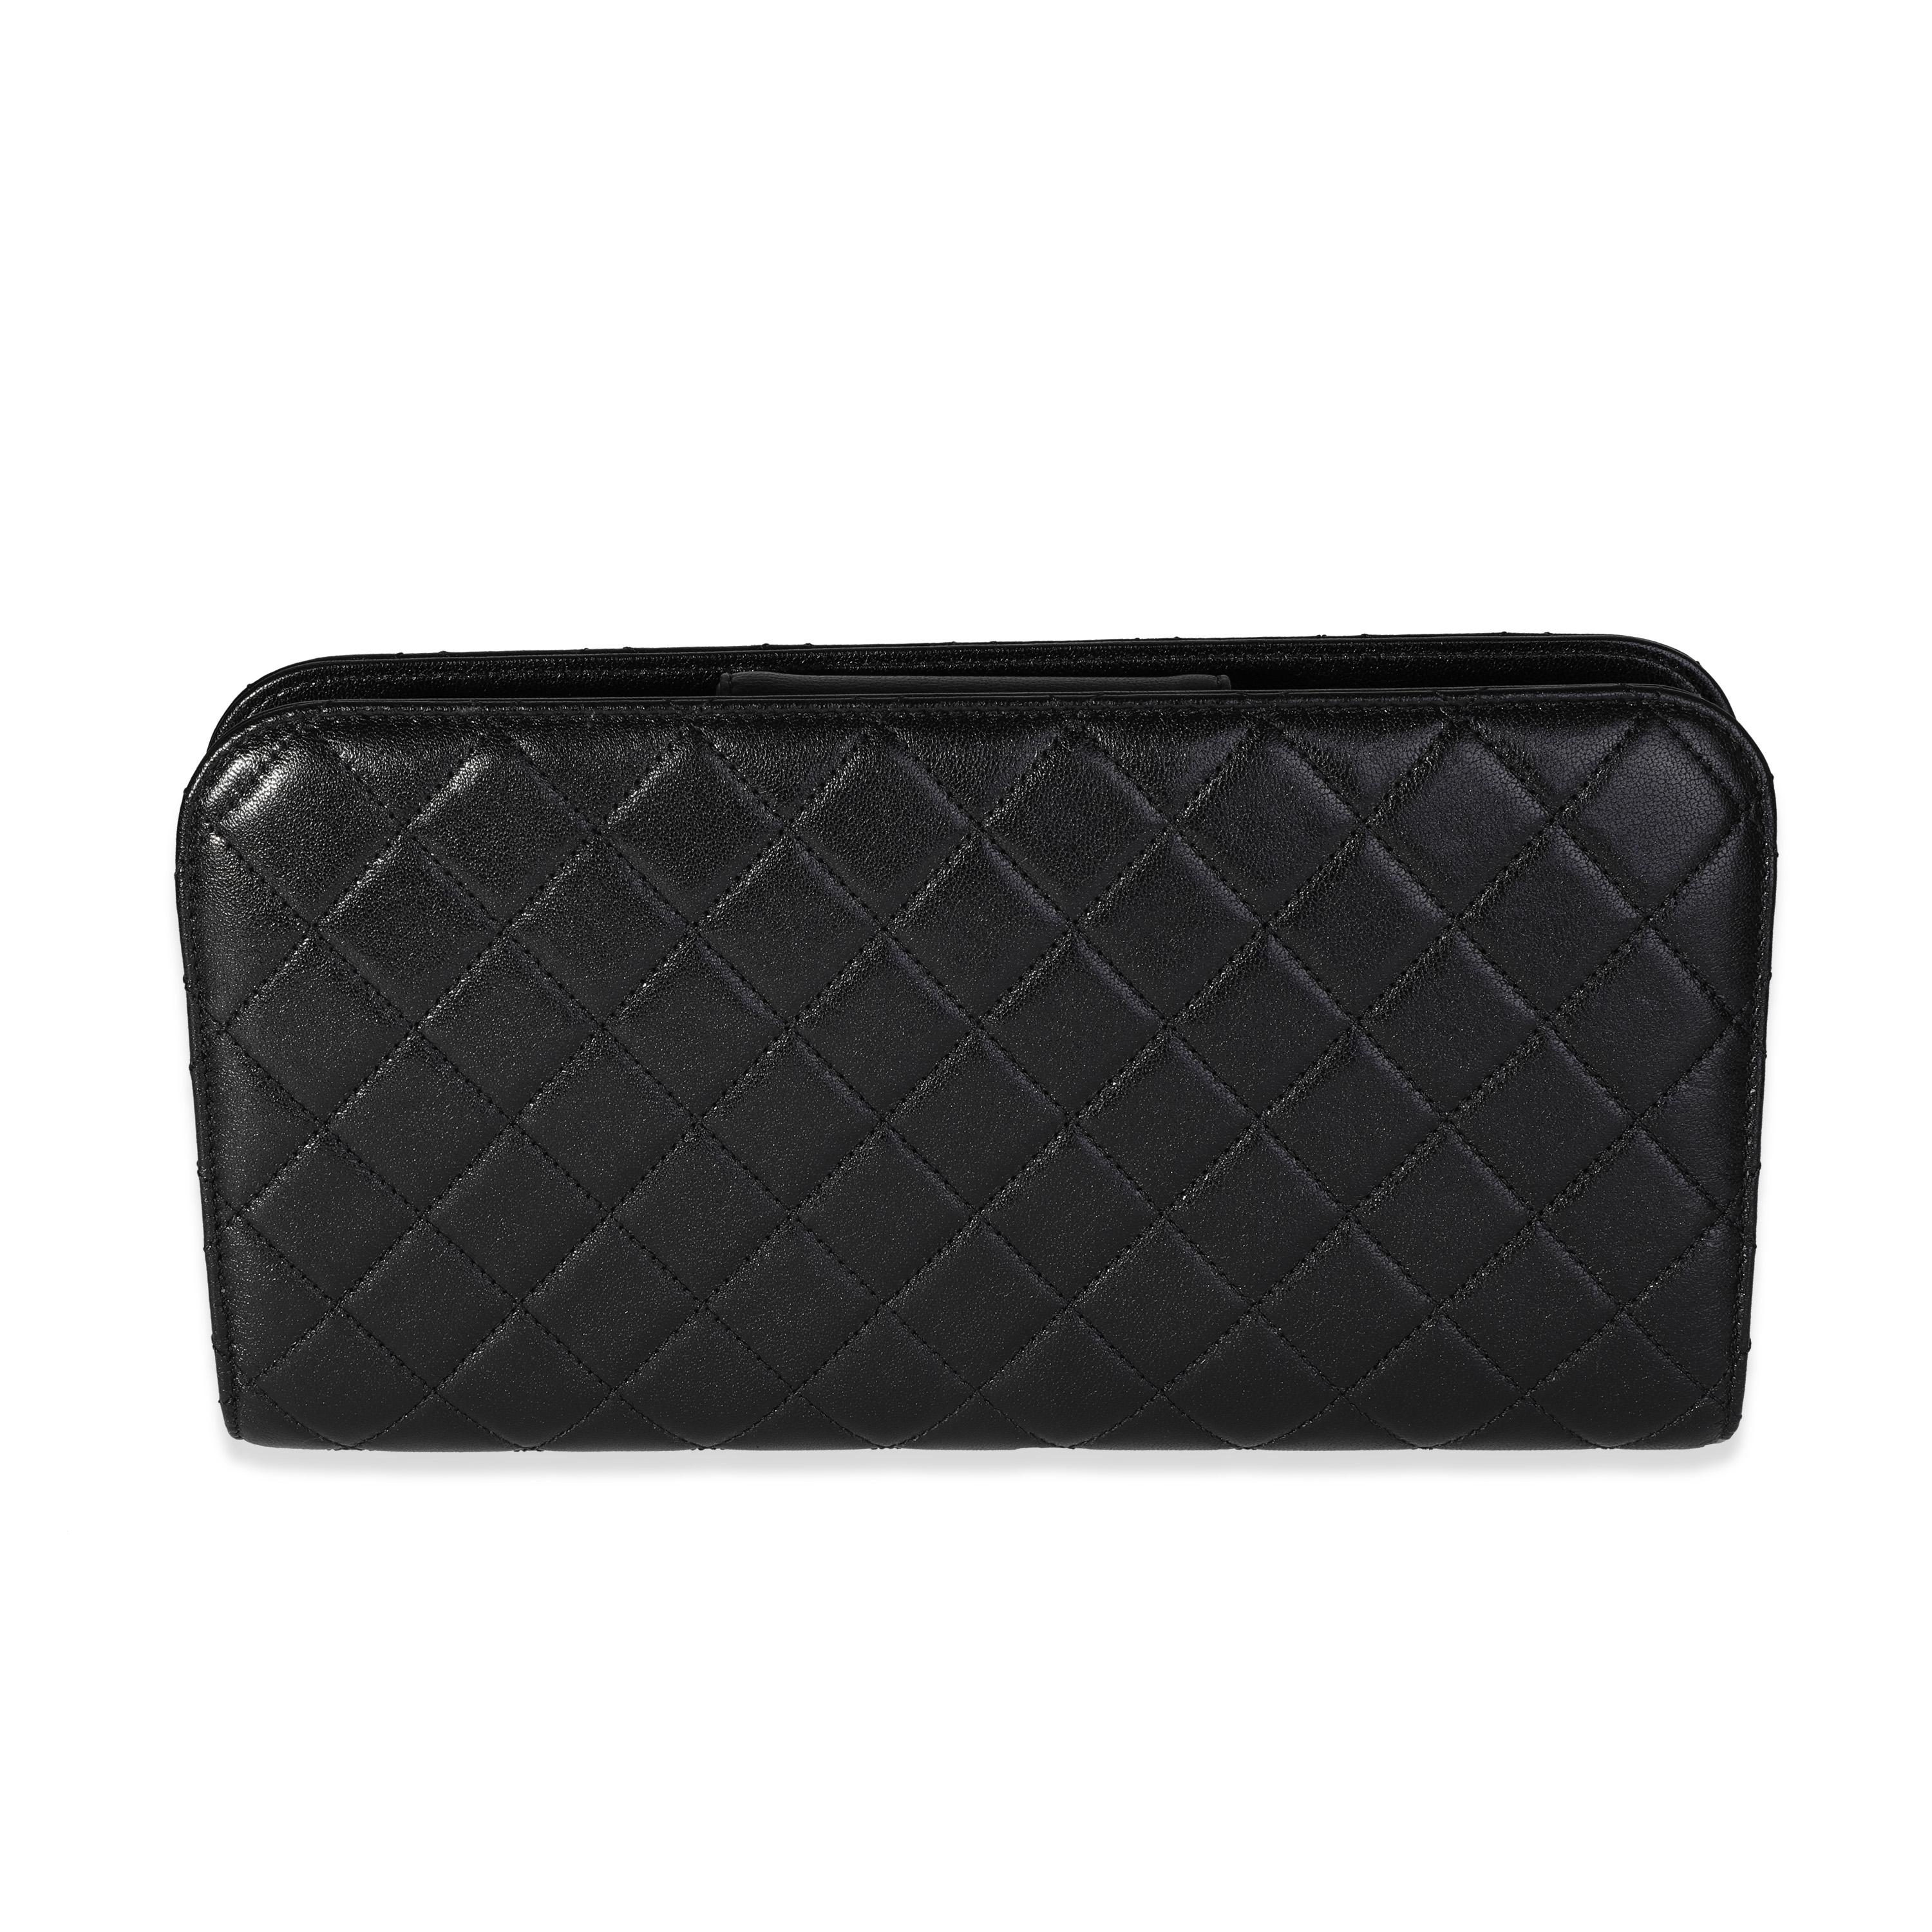 Listing Title: Chanel Black Quilted Chèvre Coco Midnight Clutch
SKU: 118565
Condition: Pre-owned (3000)
Handbag Condition: Never Worn
Brand: Chanel
Origin Country: Italy
Handbag Silhouette: Clutch
Occasions: Evening;Fall/Winter;Seasonal
Size